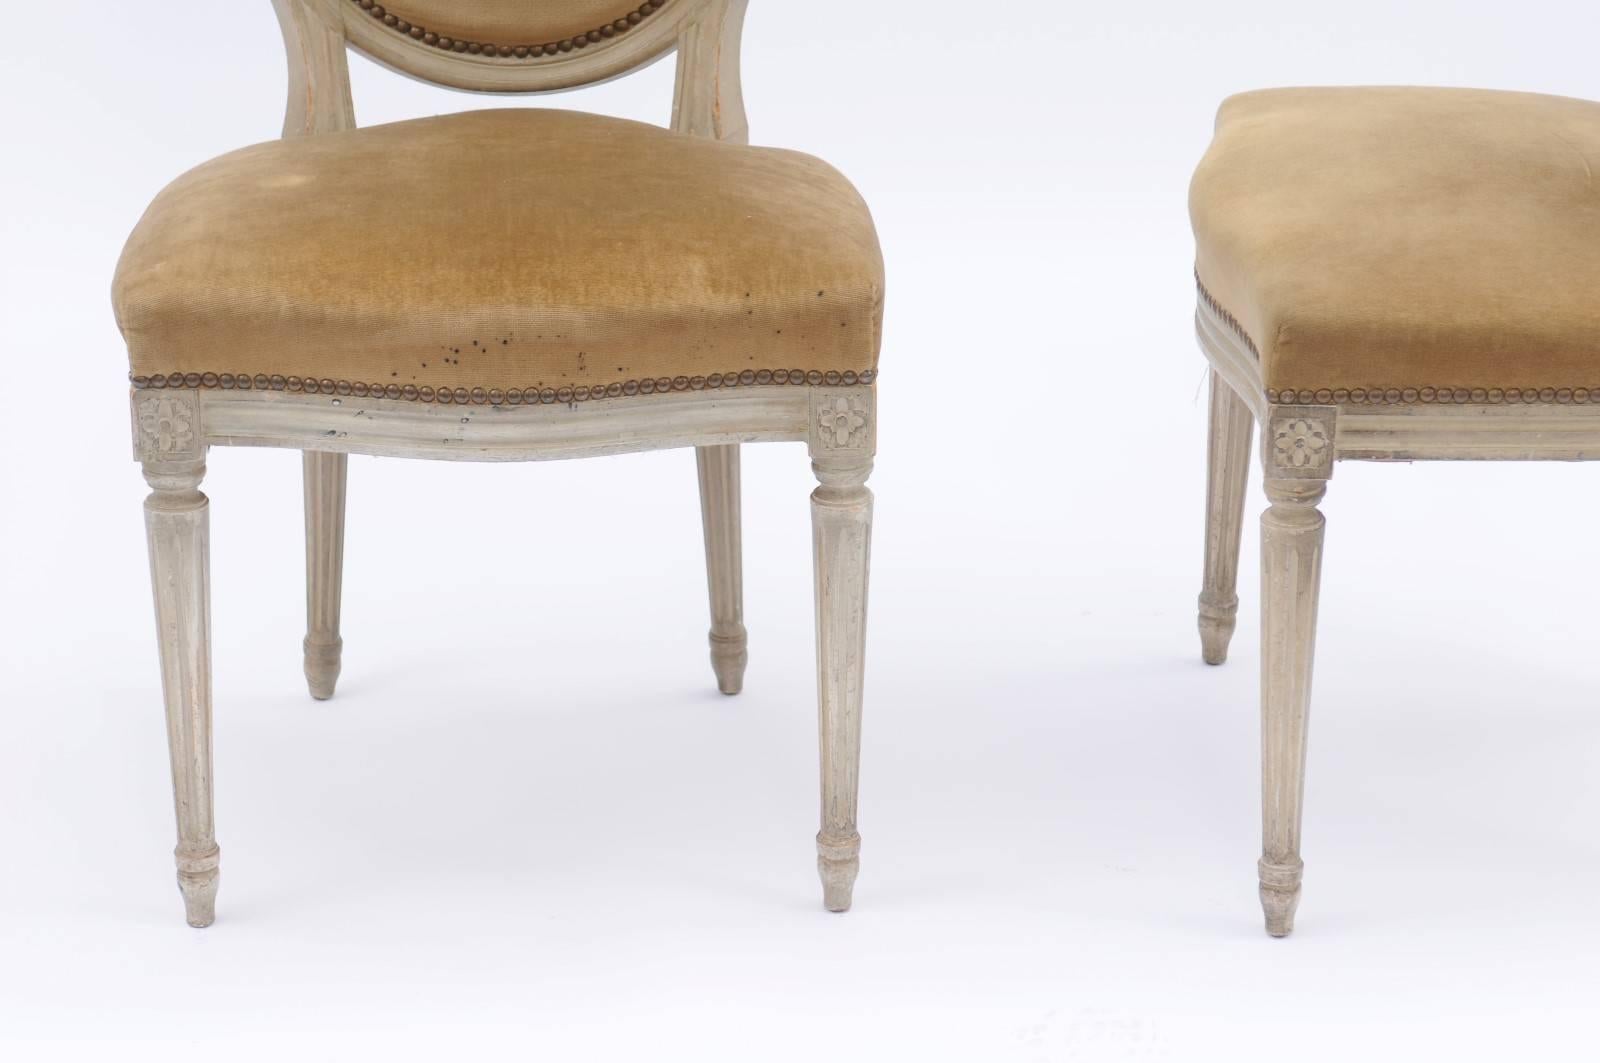 Pair of French Louis XVI Style Painted Wood Side Chairs with Original Upholstery 1